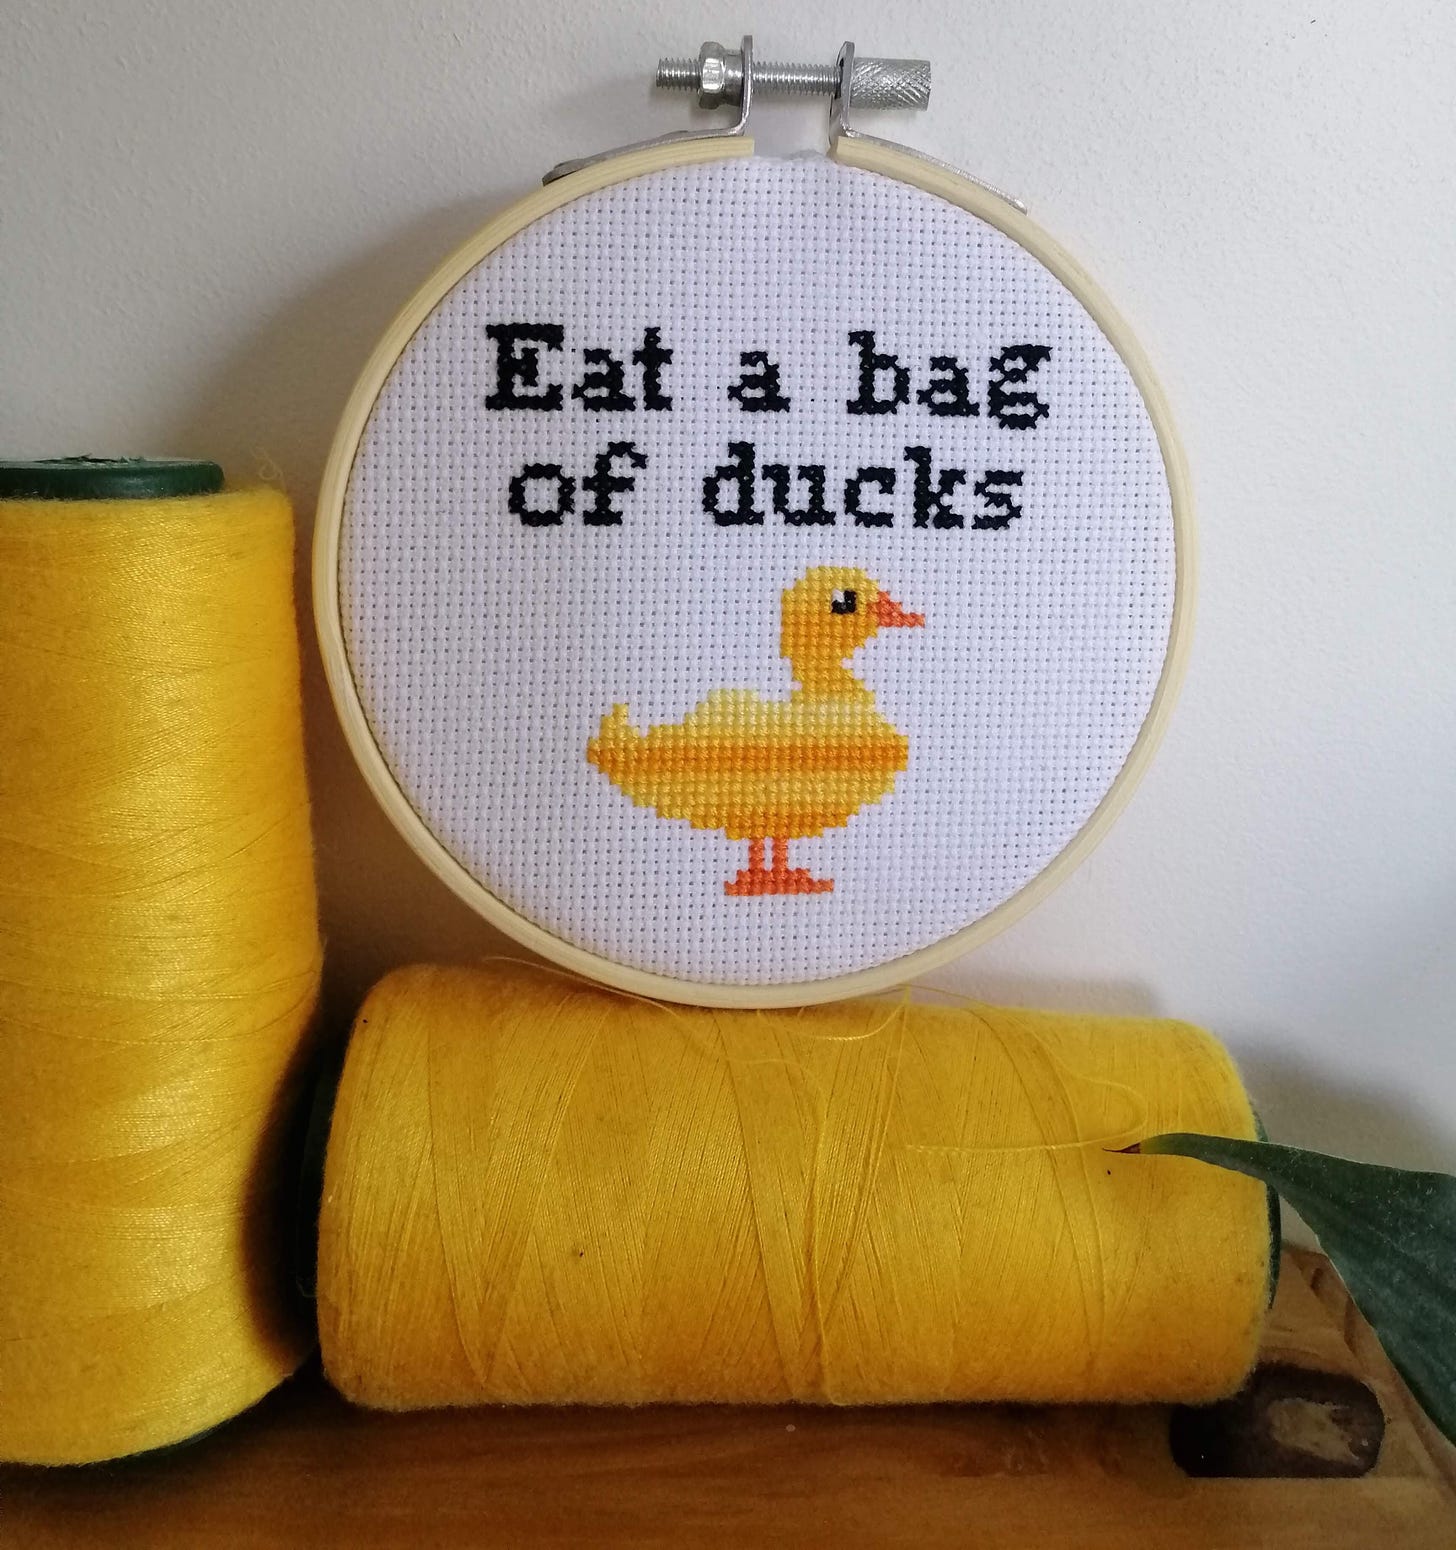 Completed stitch in a hoop with a duck and text above which reads "eat a bag of ducks"